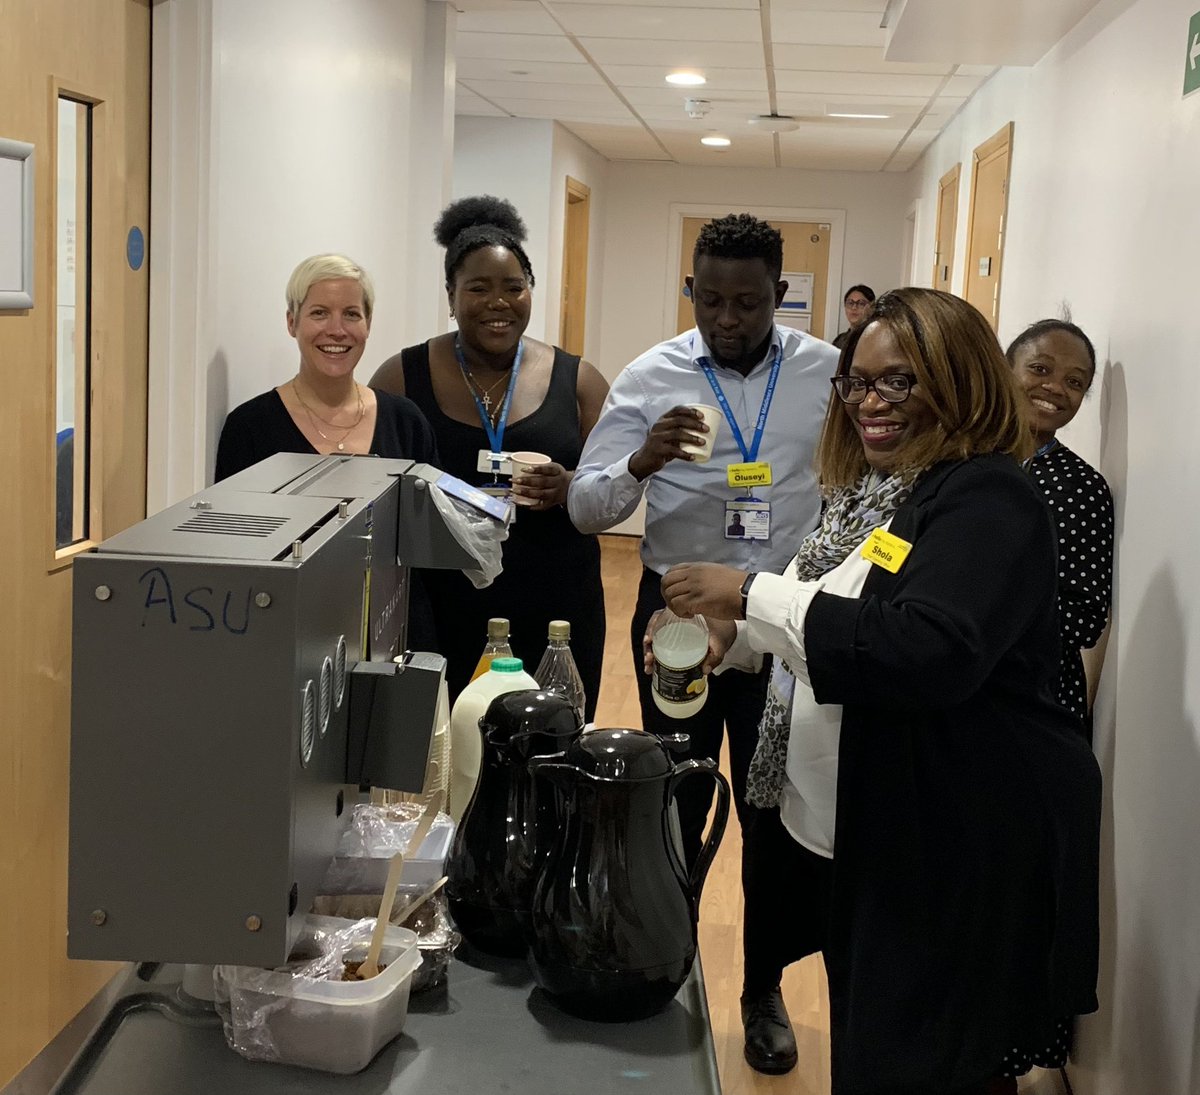 A beautiful way to end the week @NorthMidNHS @NMITCommunity by spending time with staff during the #teatrolley run with @SholaAdegoroye Thank you everyone for being so amazing 🤩 & for letting us chill in your offices with AC 🥵 #staffwellbeing #heatwave